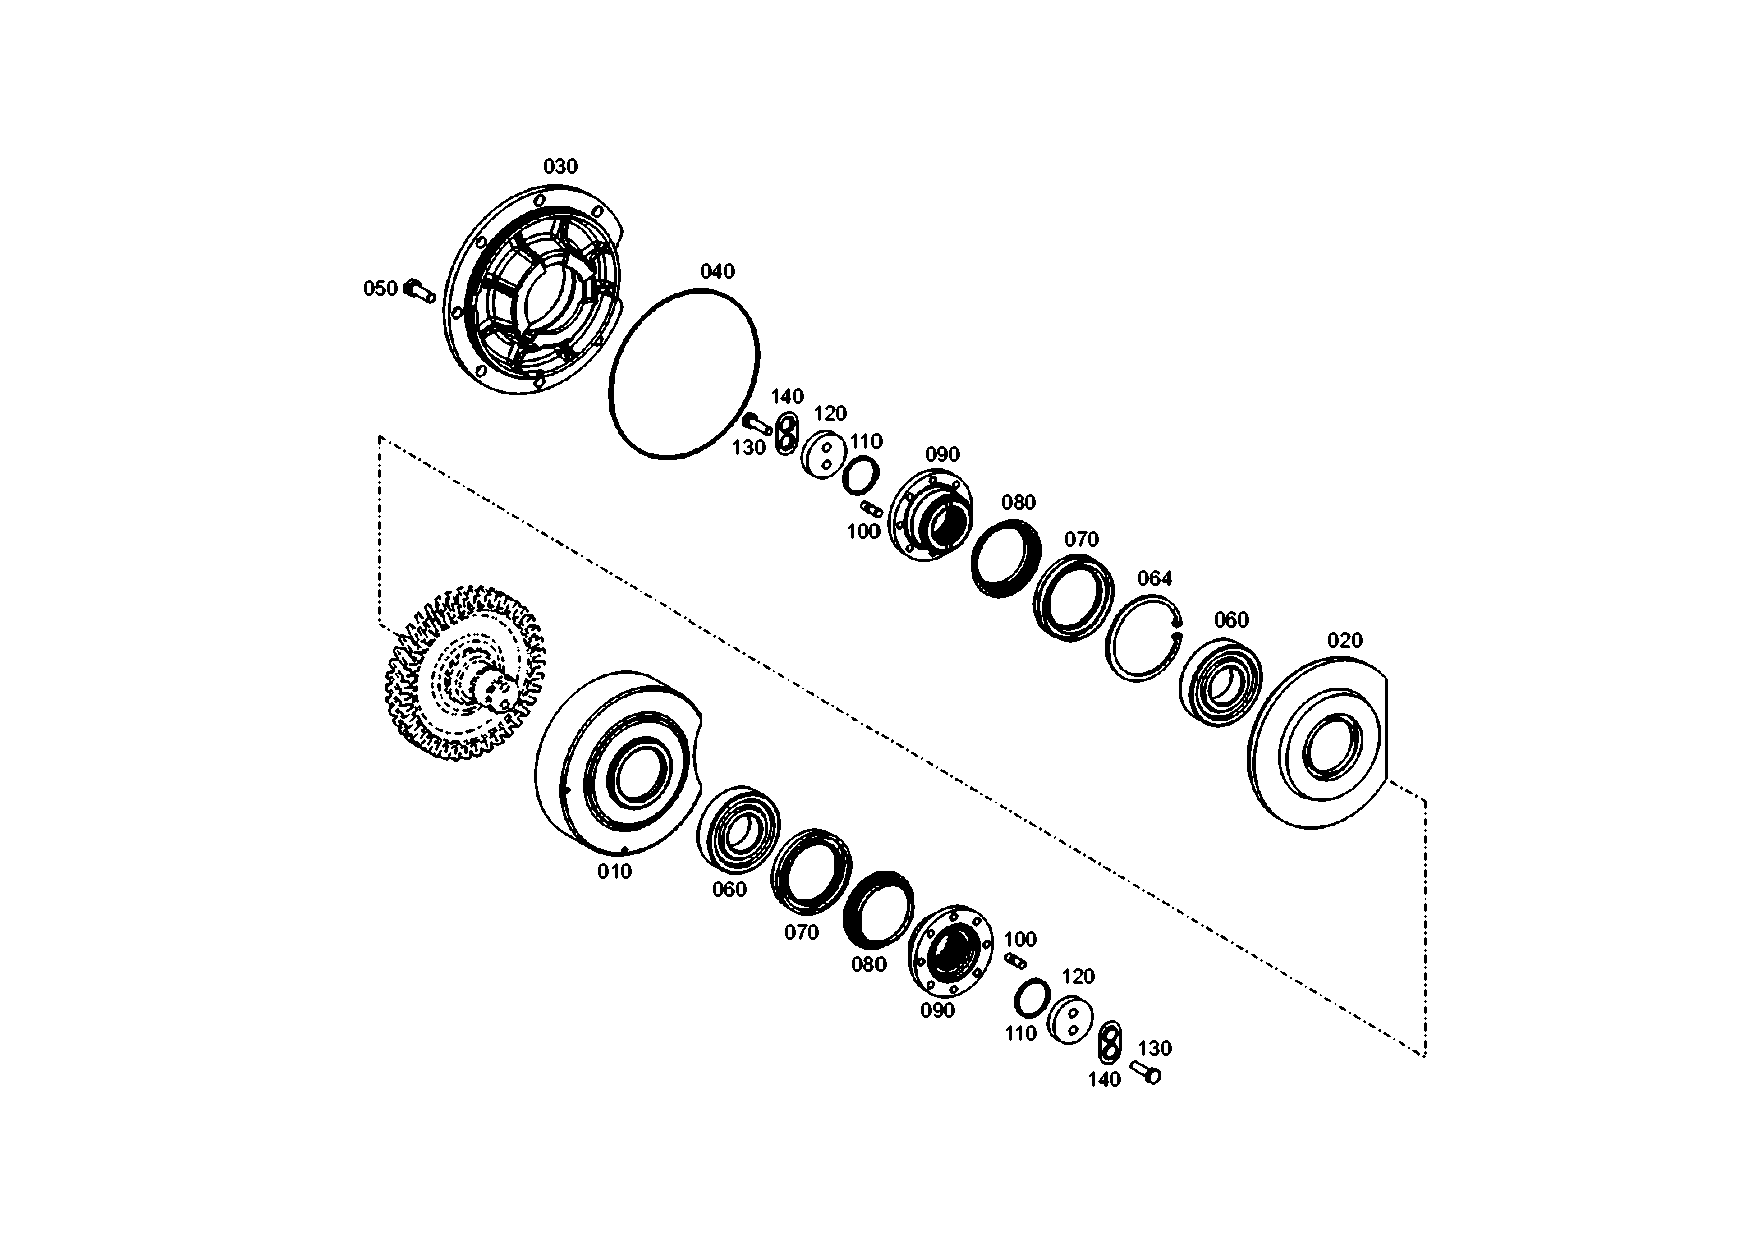 drawing for TREPEL AIRPORT EQUIPMENT GMBH 000,902,0430 - LOCK PLATE (figure 3)